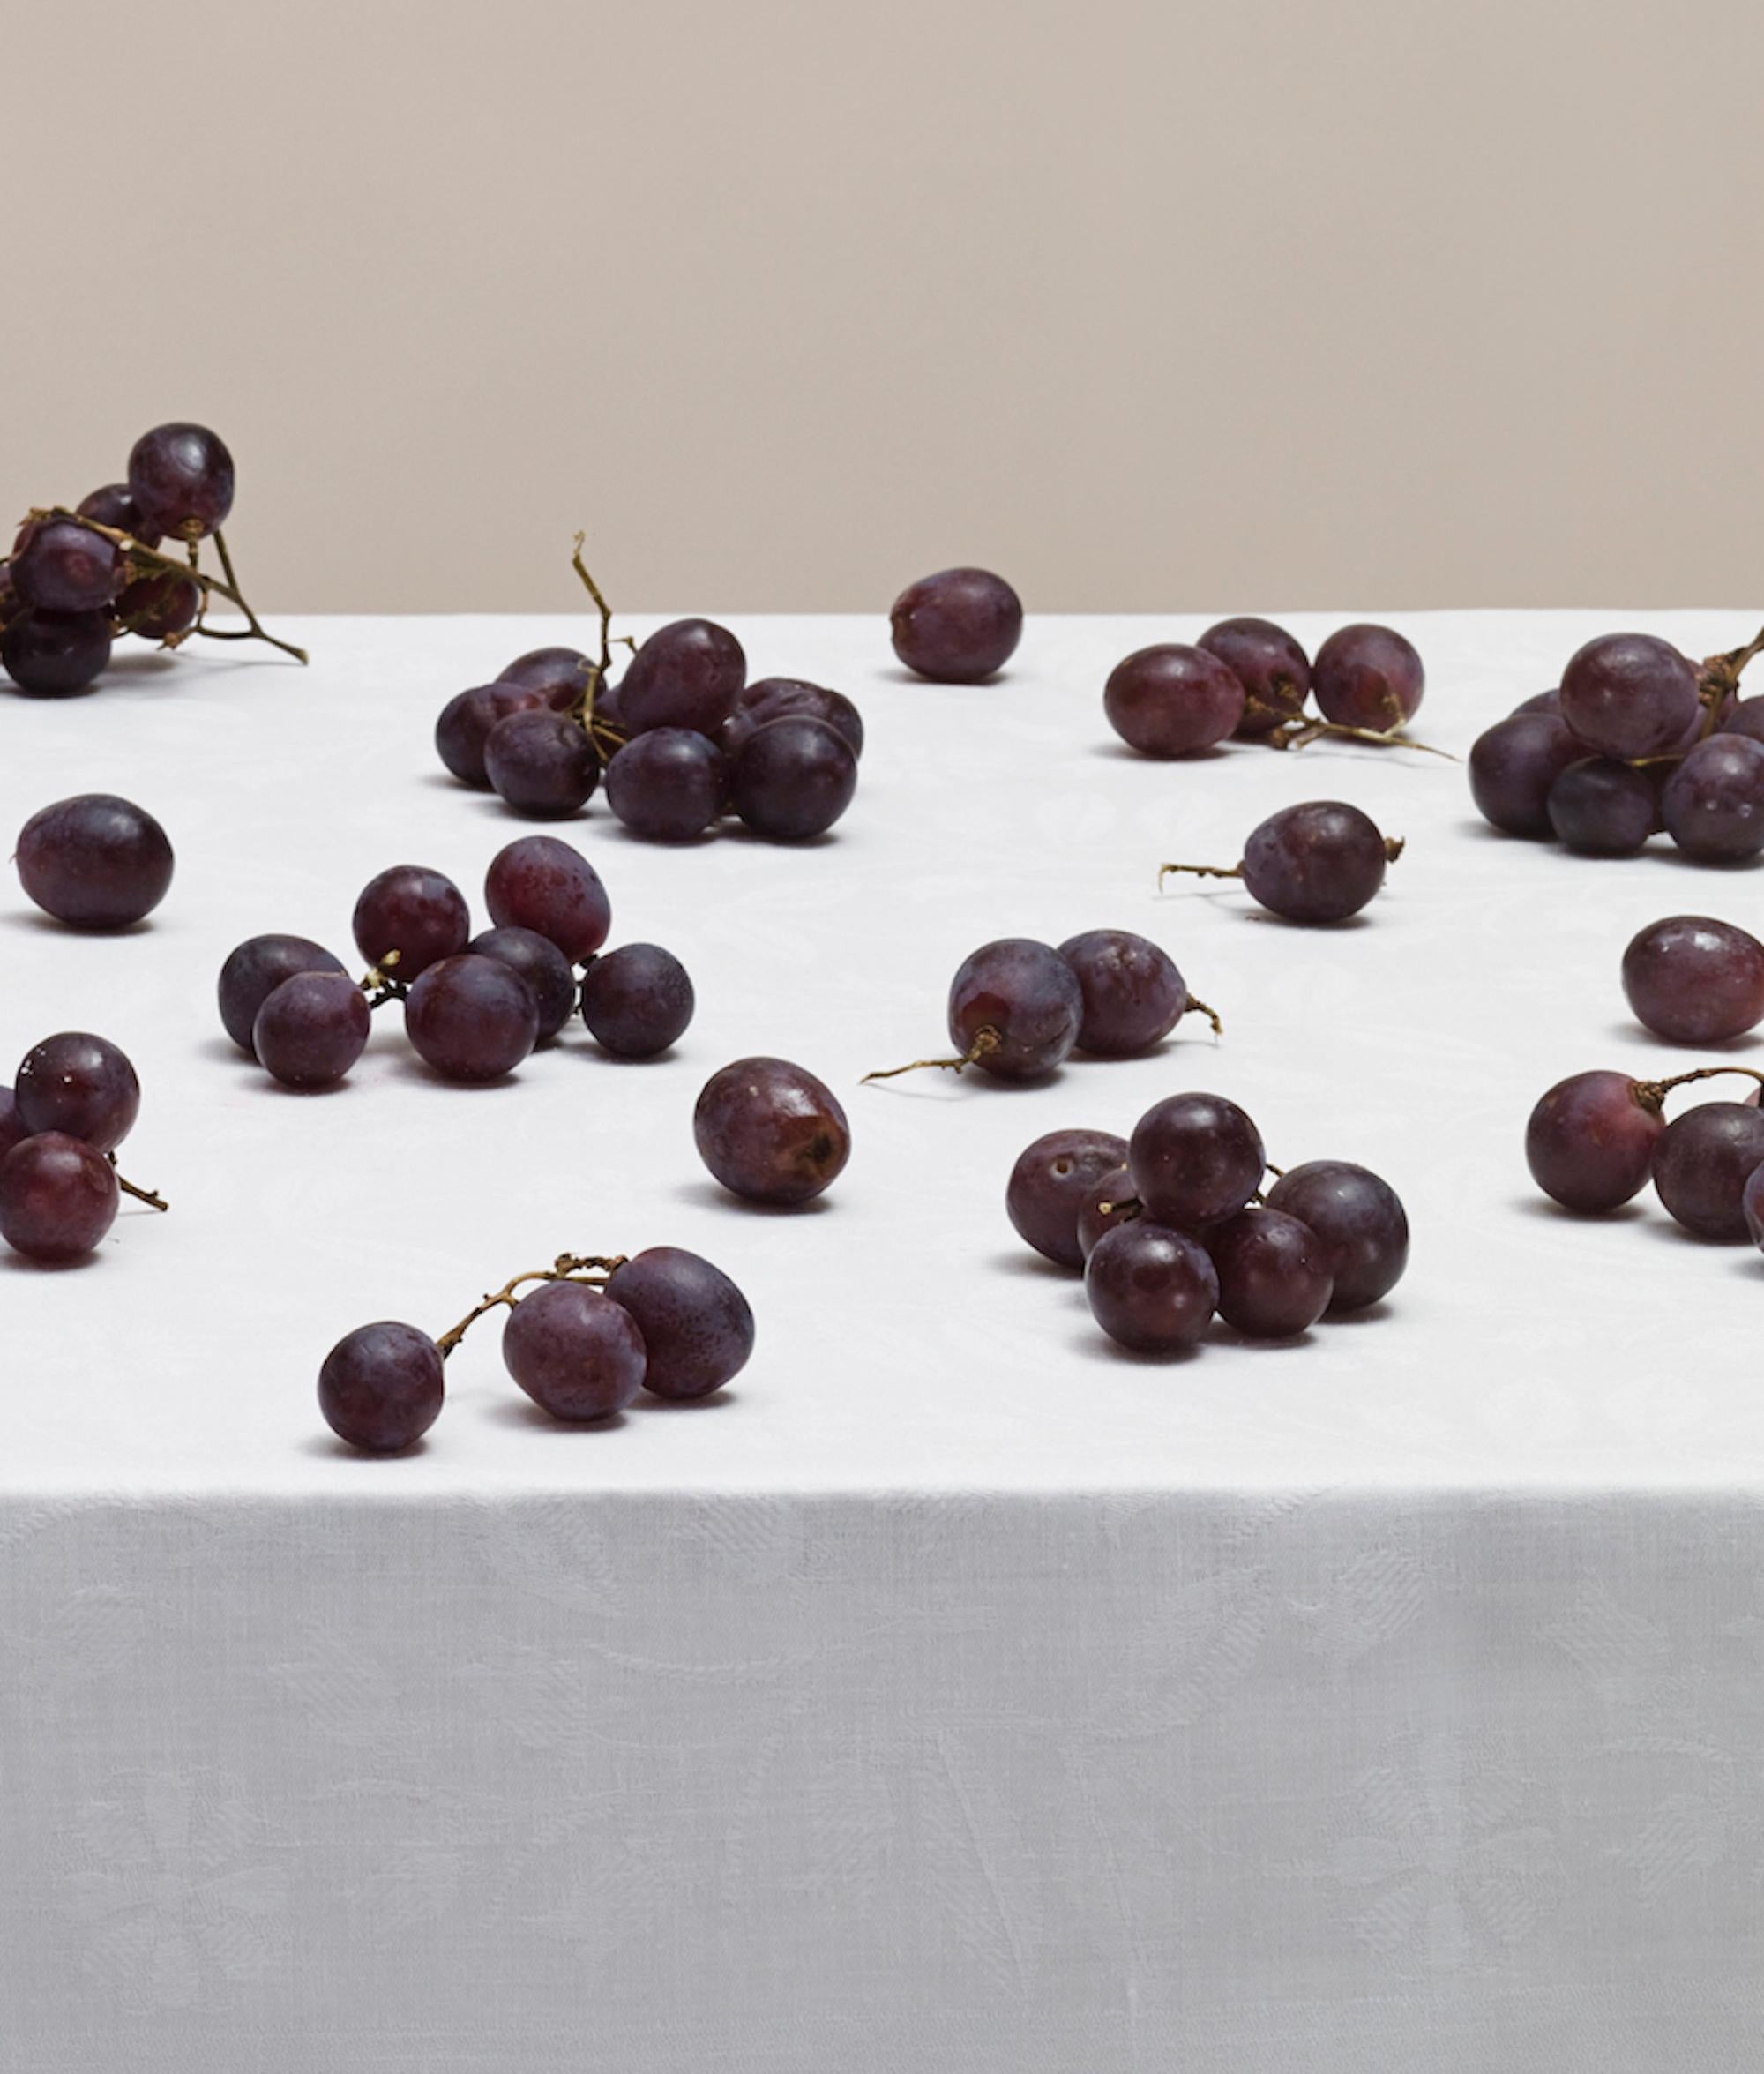 Untitled (#08-23) by Pawel Żak - Contemporary studio photography, grape, fruits For Sale 3